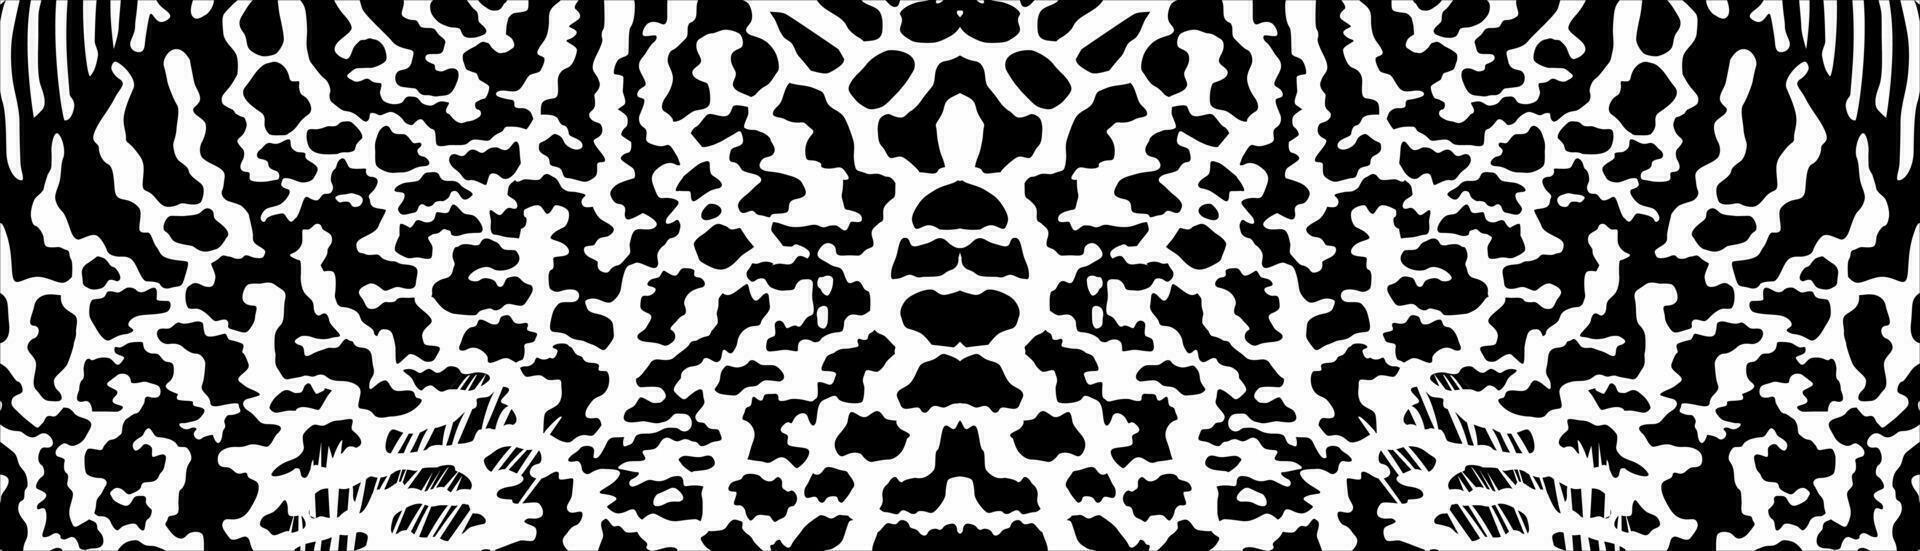 Artistic Motifs Pattern Inspired by Symphysodon or Discus Fish Skin, for decoration, ornate, background, website, wallpaper, fashion, interior, cover, animal print, or graphic design element vector